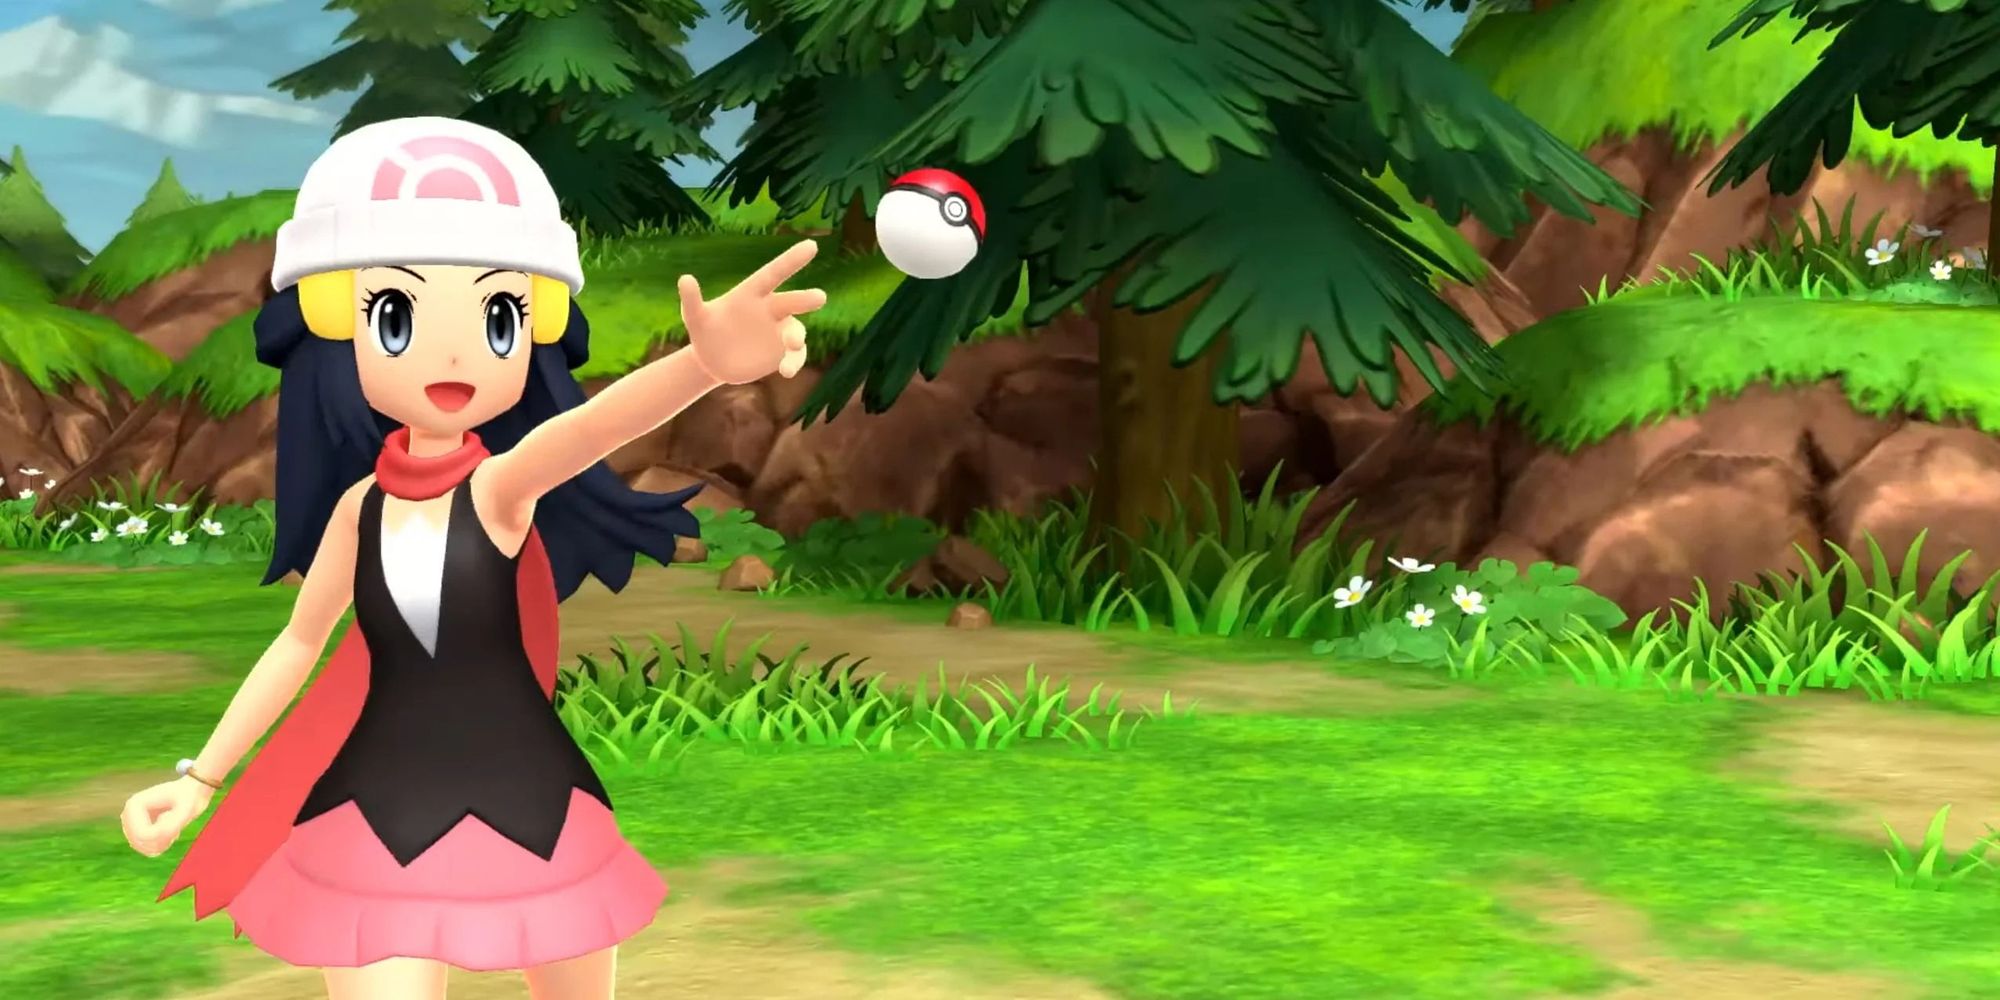 Official screenshot for the Pokemon Sinnoh remakes